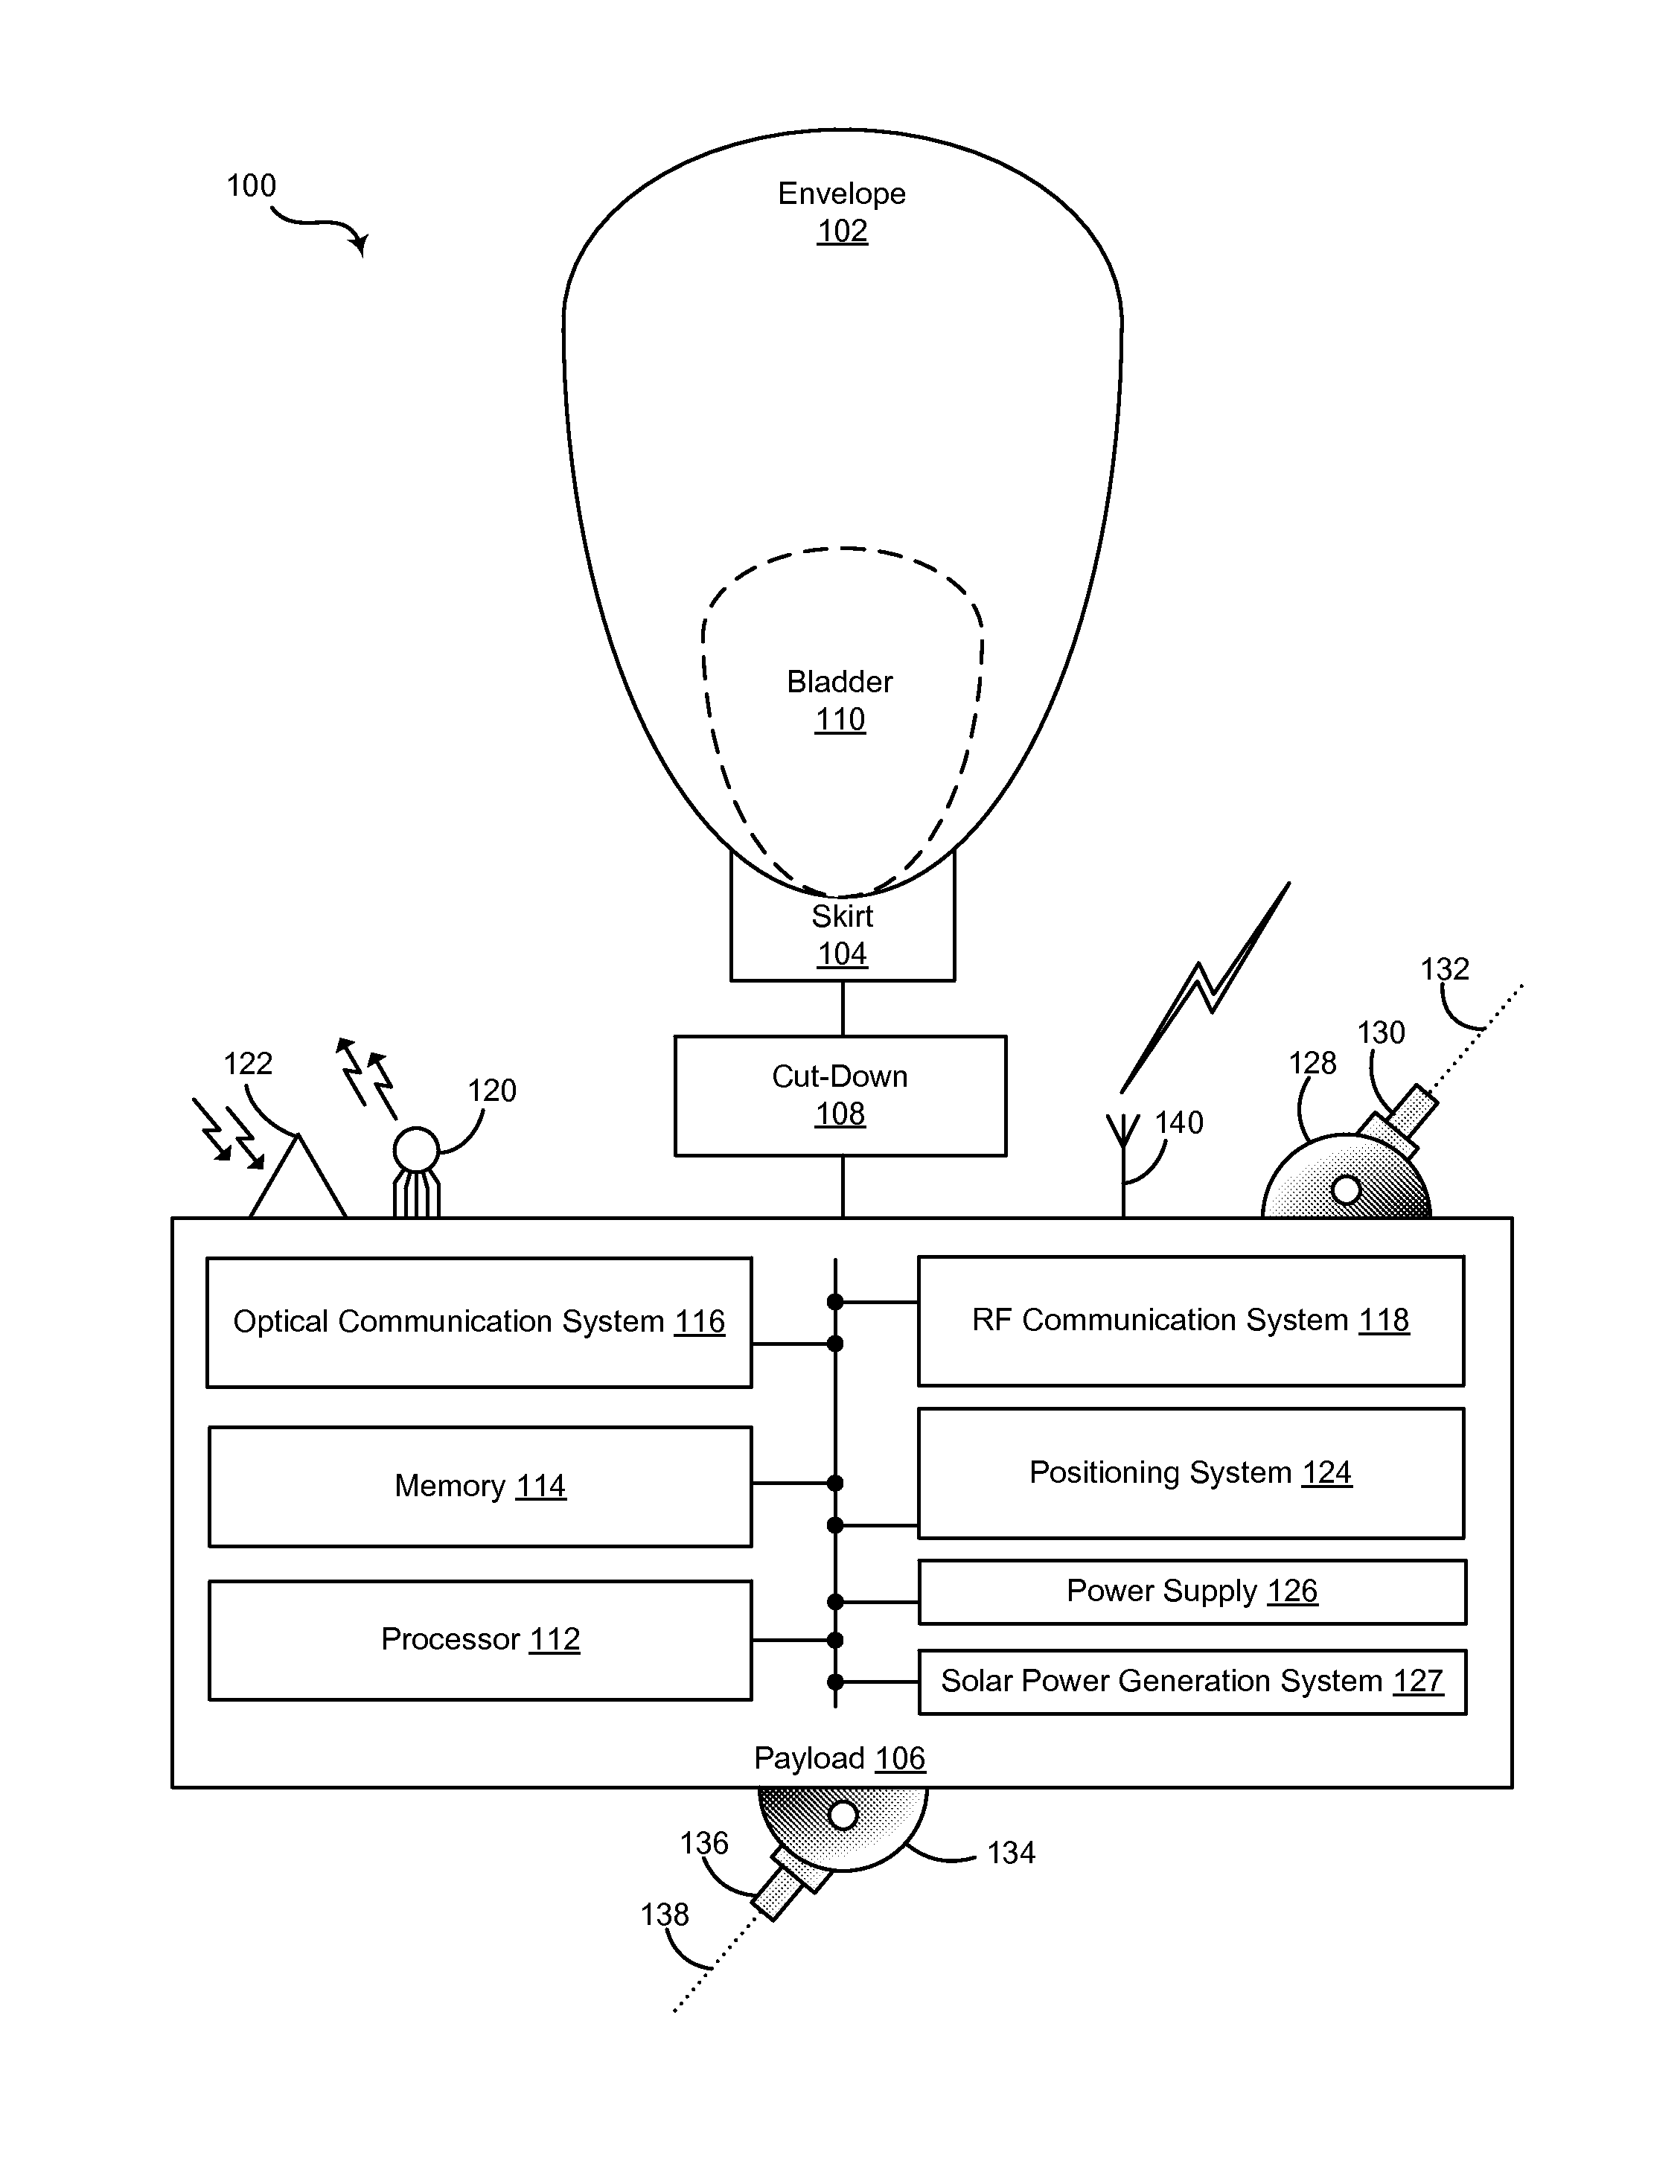 Use of satellite-based routing processes with a balloon network